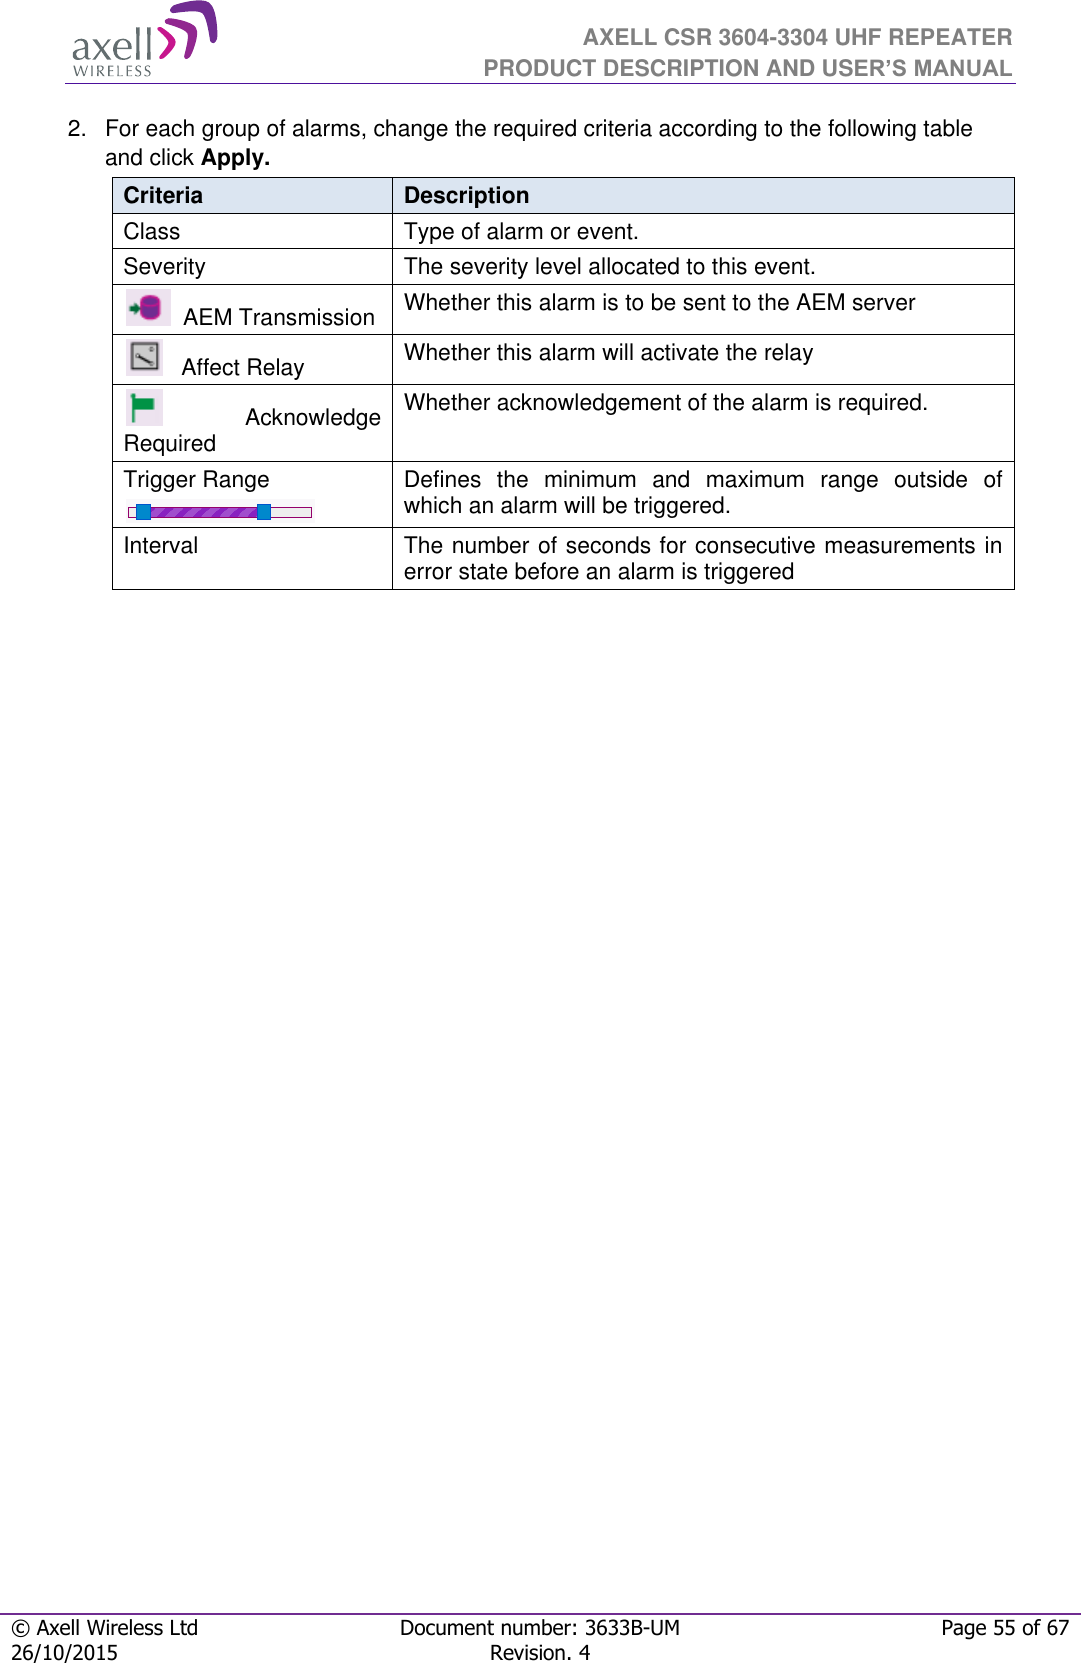  AXELL CSR 3604-3304 UHF REPEATER PRODUCT DESCRIPTION AND USER’S MANUAL  © Axell Wireless Ltd Document number: 3633B-UM Page 55 of 67 26/10/2015 Revision. 4   2.  For each group of alarms, change the required criteria according to the following table and click Apply. Criteria Description Class Type of alarm or event. Severity The severity level allocated to this event.   AEM Transmission Whether this alarm is to be sent to the AEM server    Affect Relay Whether this alarm will activate the relay   Acknowledge Required Whether acknowledgement of the alarm is required. Trigger Range  Defines  the  minimum  and  maximum  range  outside  of which an alarm will be triggered. Interval The number of seconds for consecutive measurements in error state before an alarm is triggered    